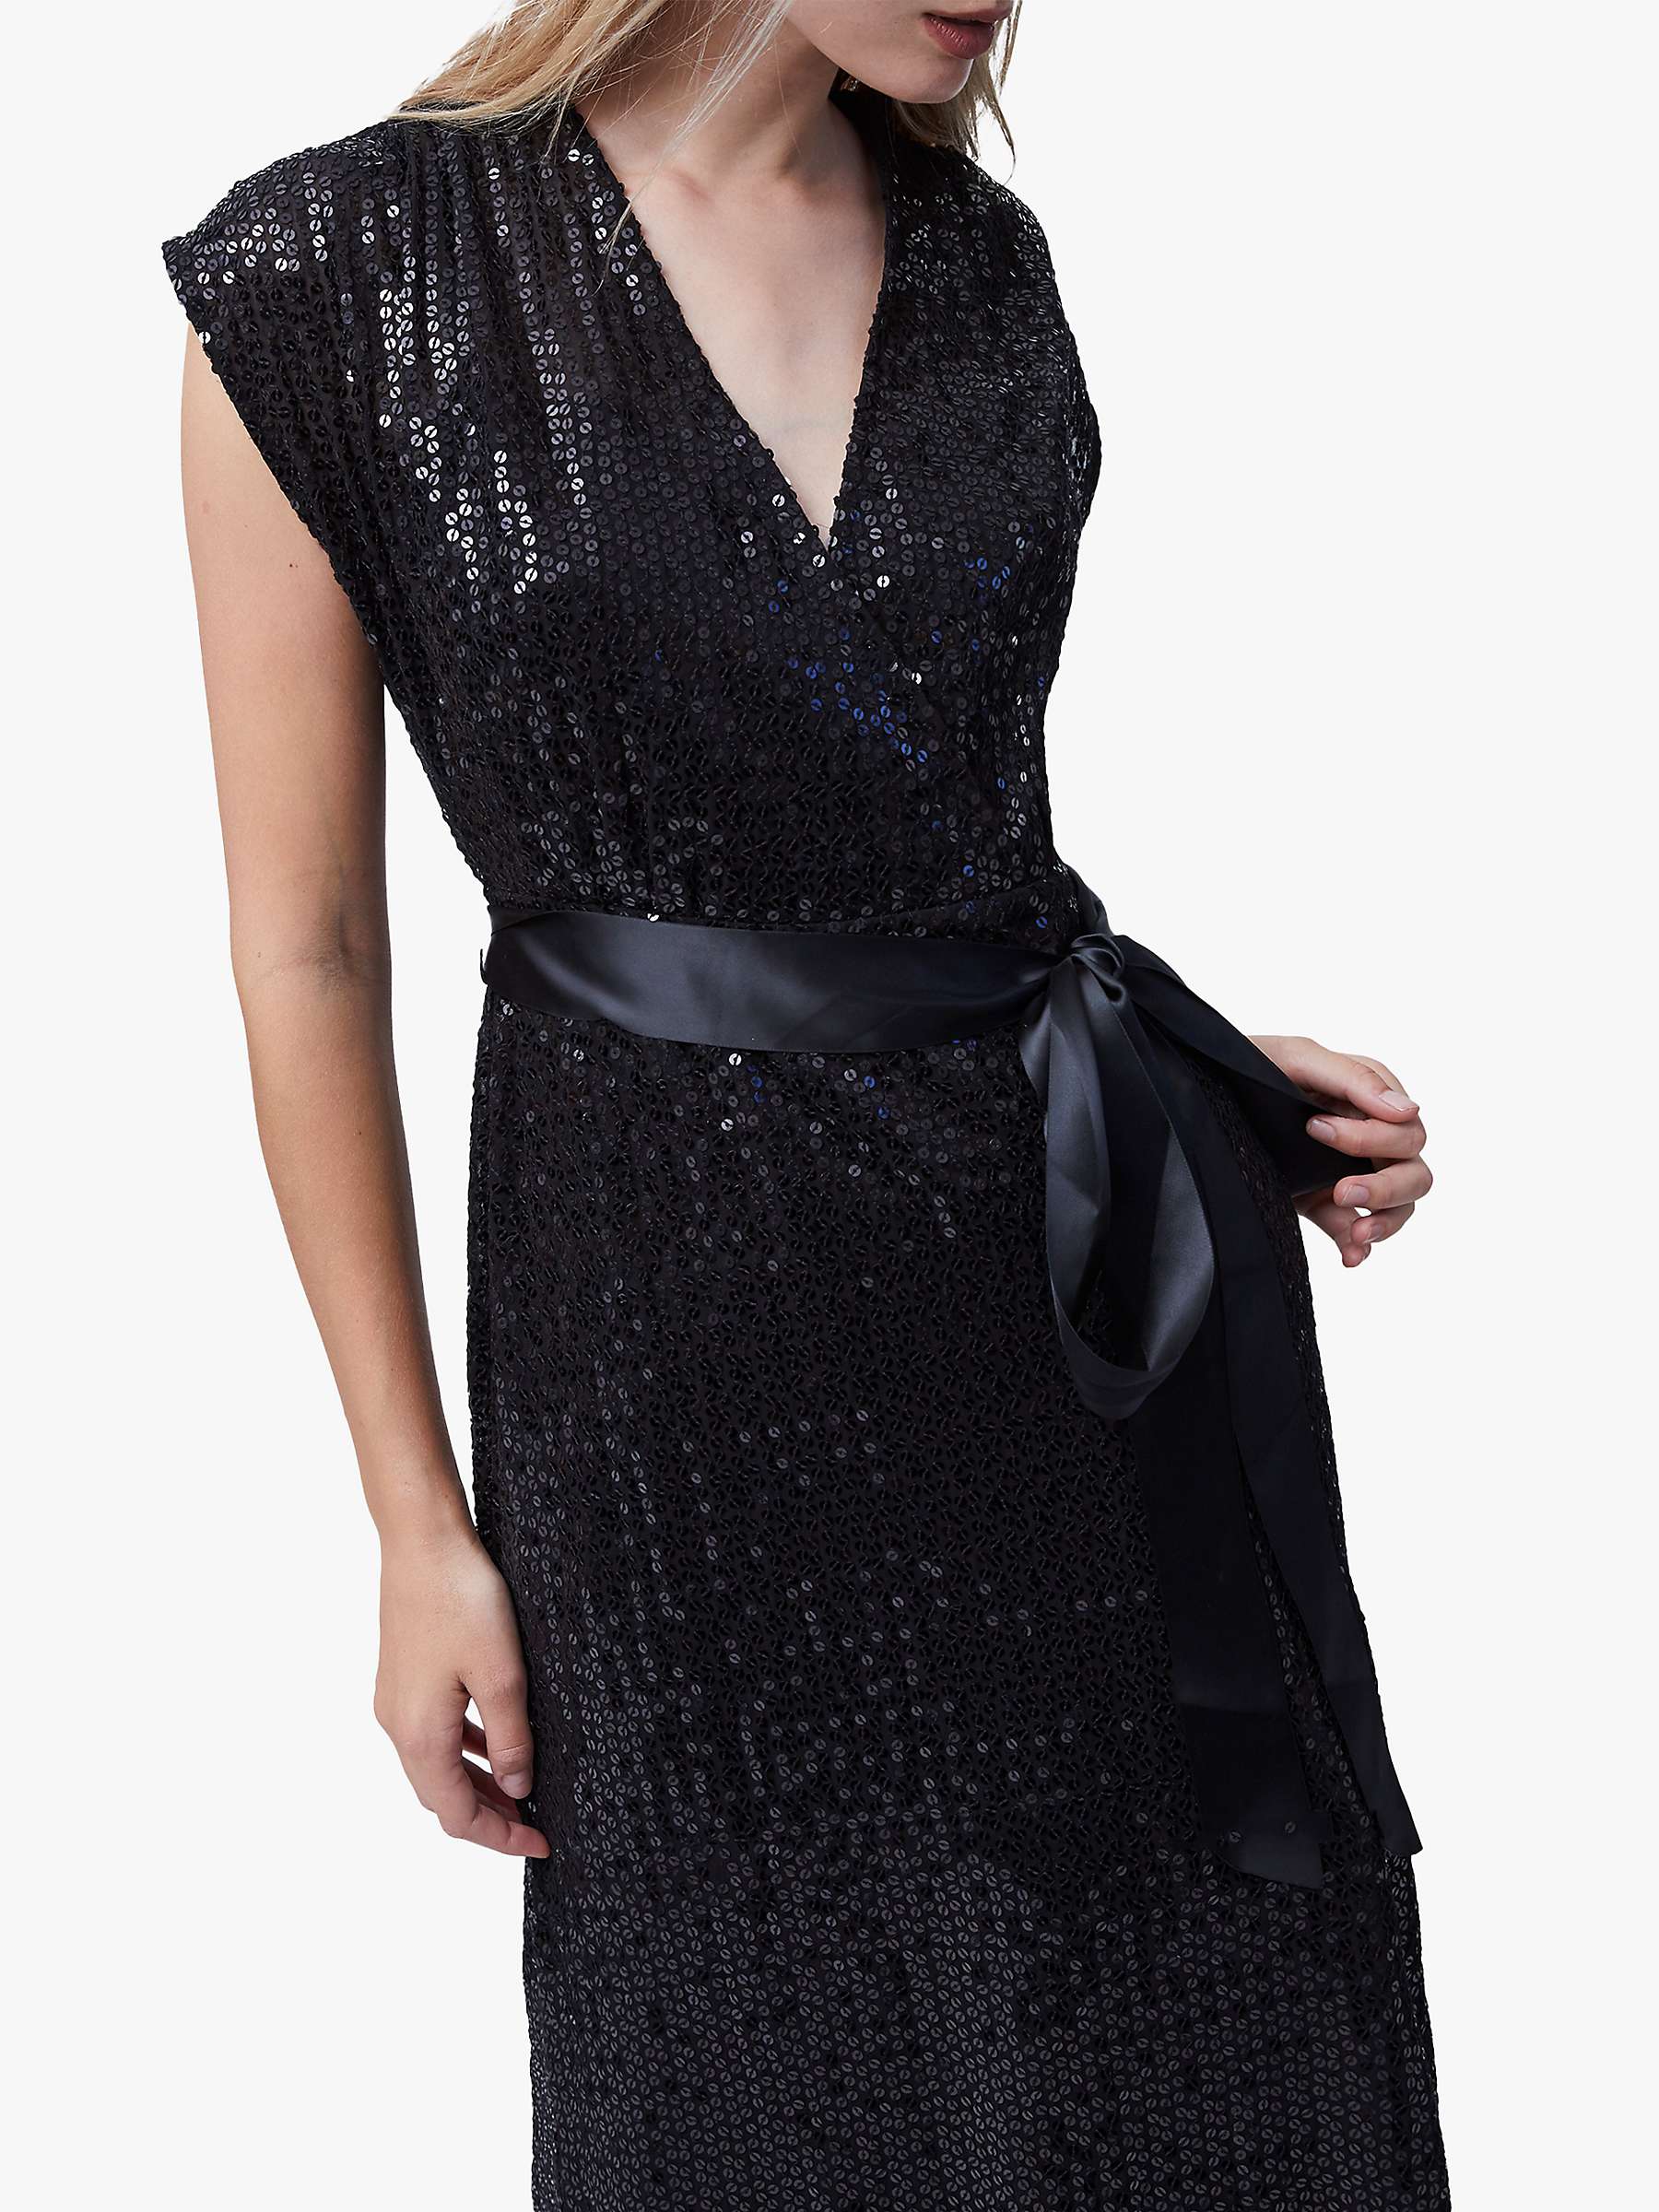 Buy French Connection Arailla Sequin Maxi Dress, Black Online at johnlewis.com